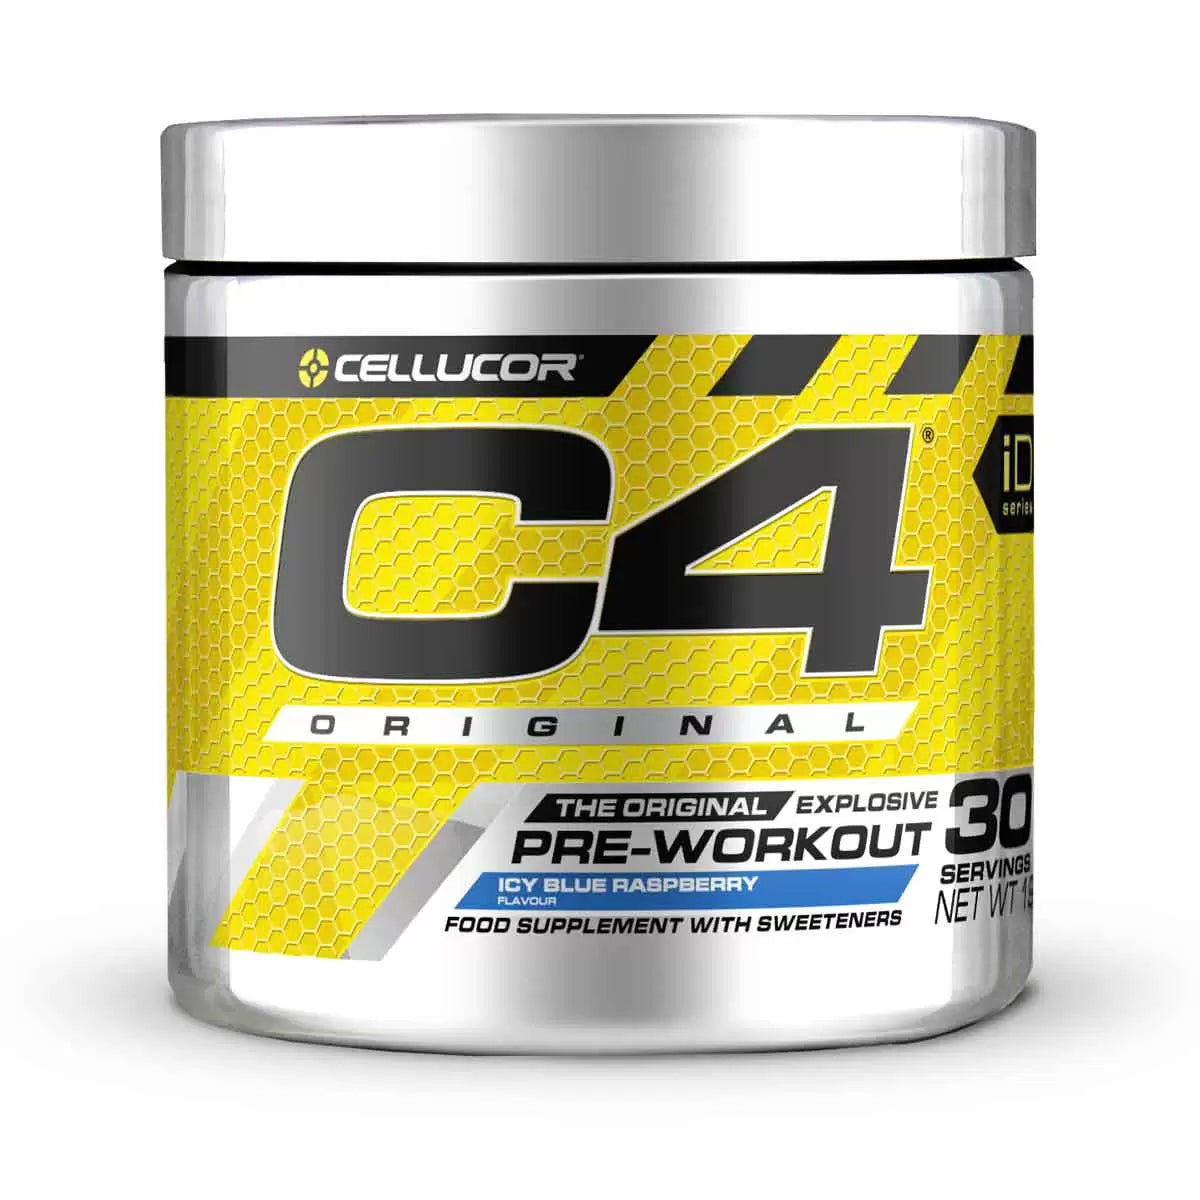 Cellucor C4 The Original Explosive Pre-Workout Icy Blue Raspberry - 390g